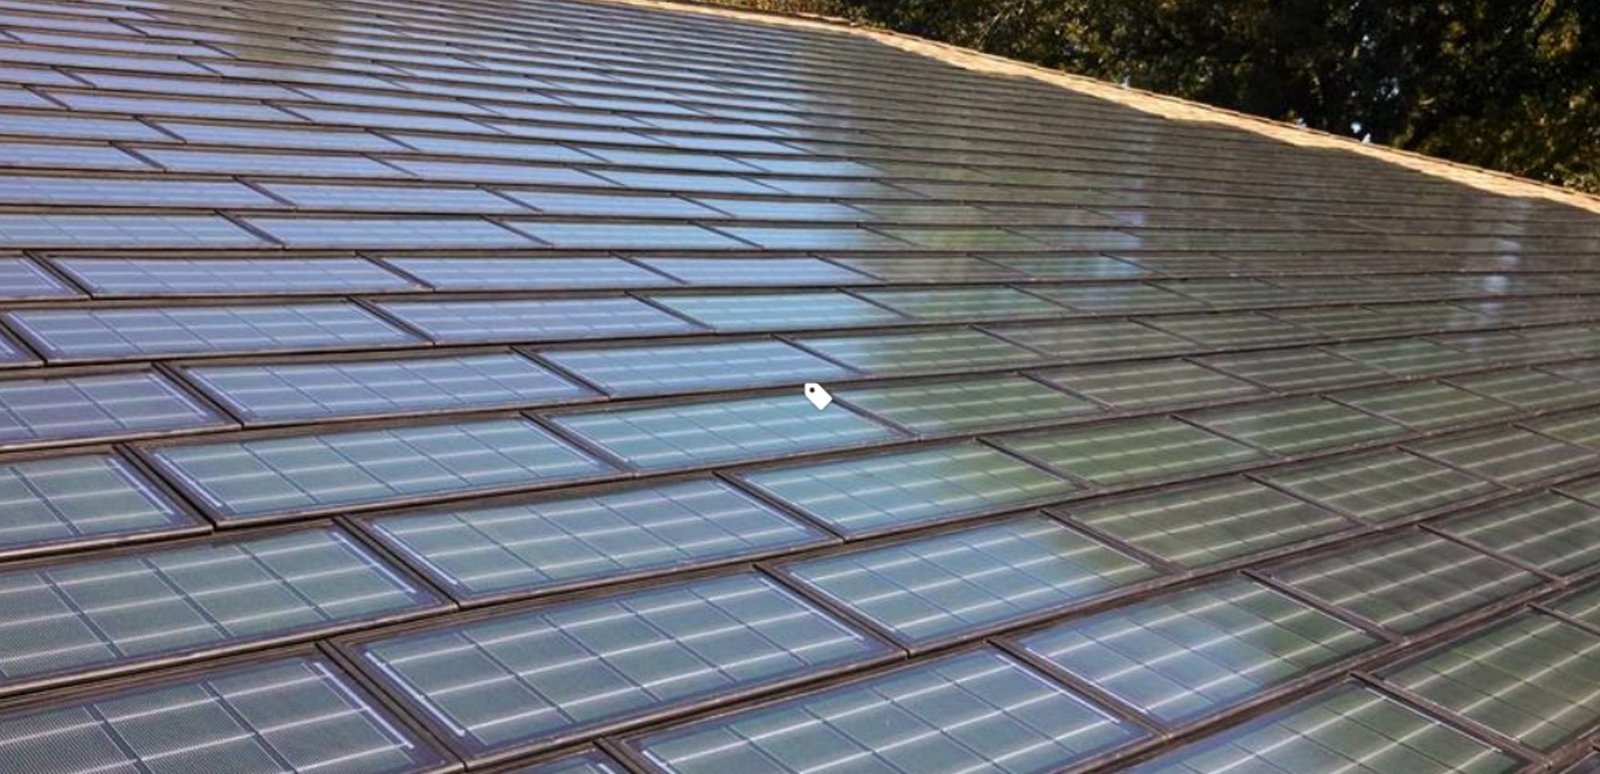 Roof Solar Shingles a Practical Alternative to Installing Solar Panels on Your Home Roof